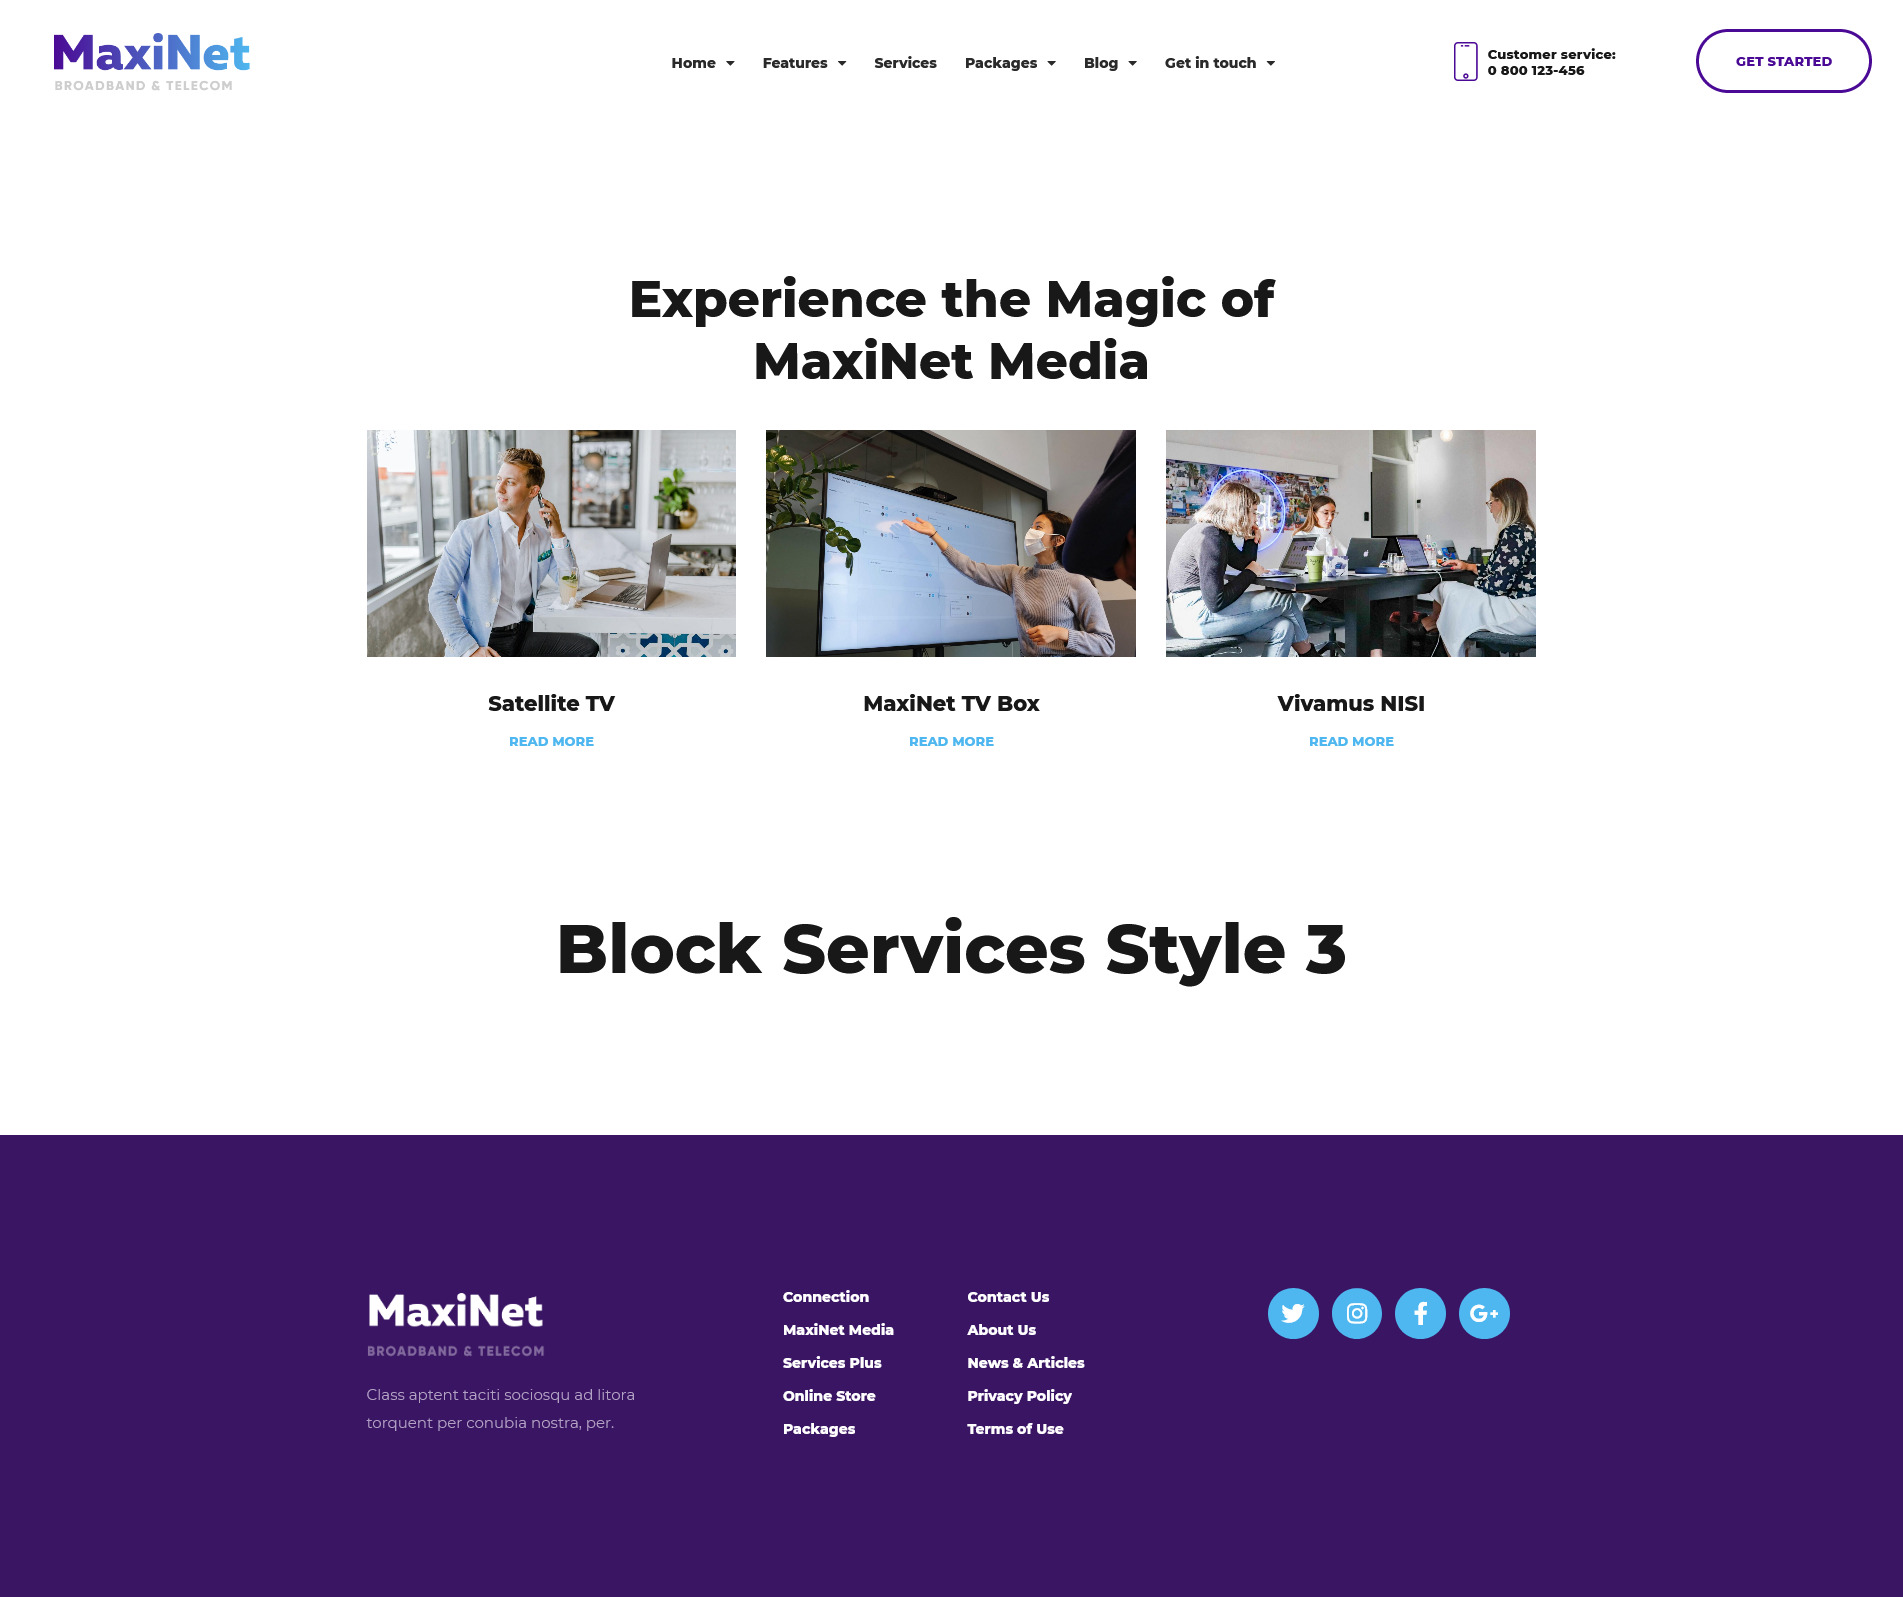 Block Services Style 3